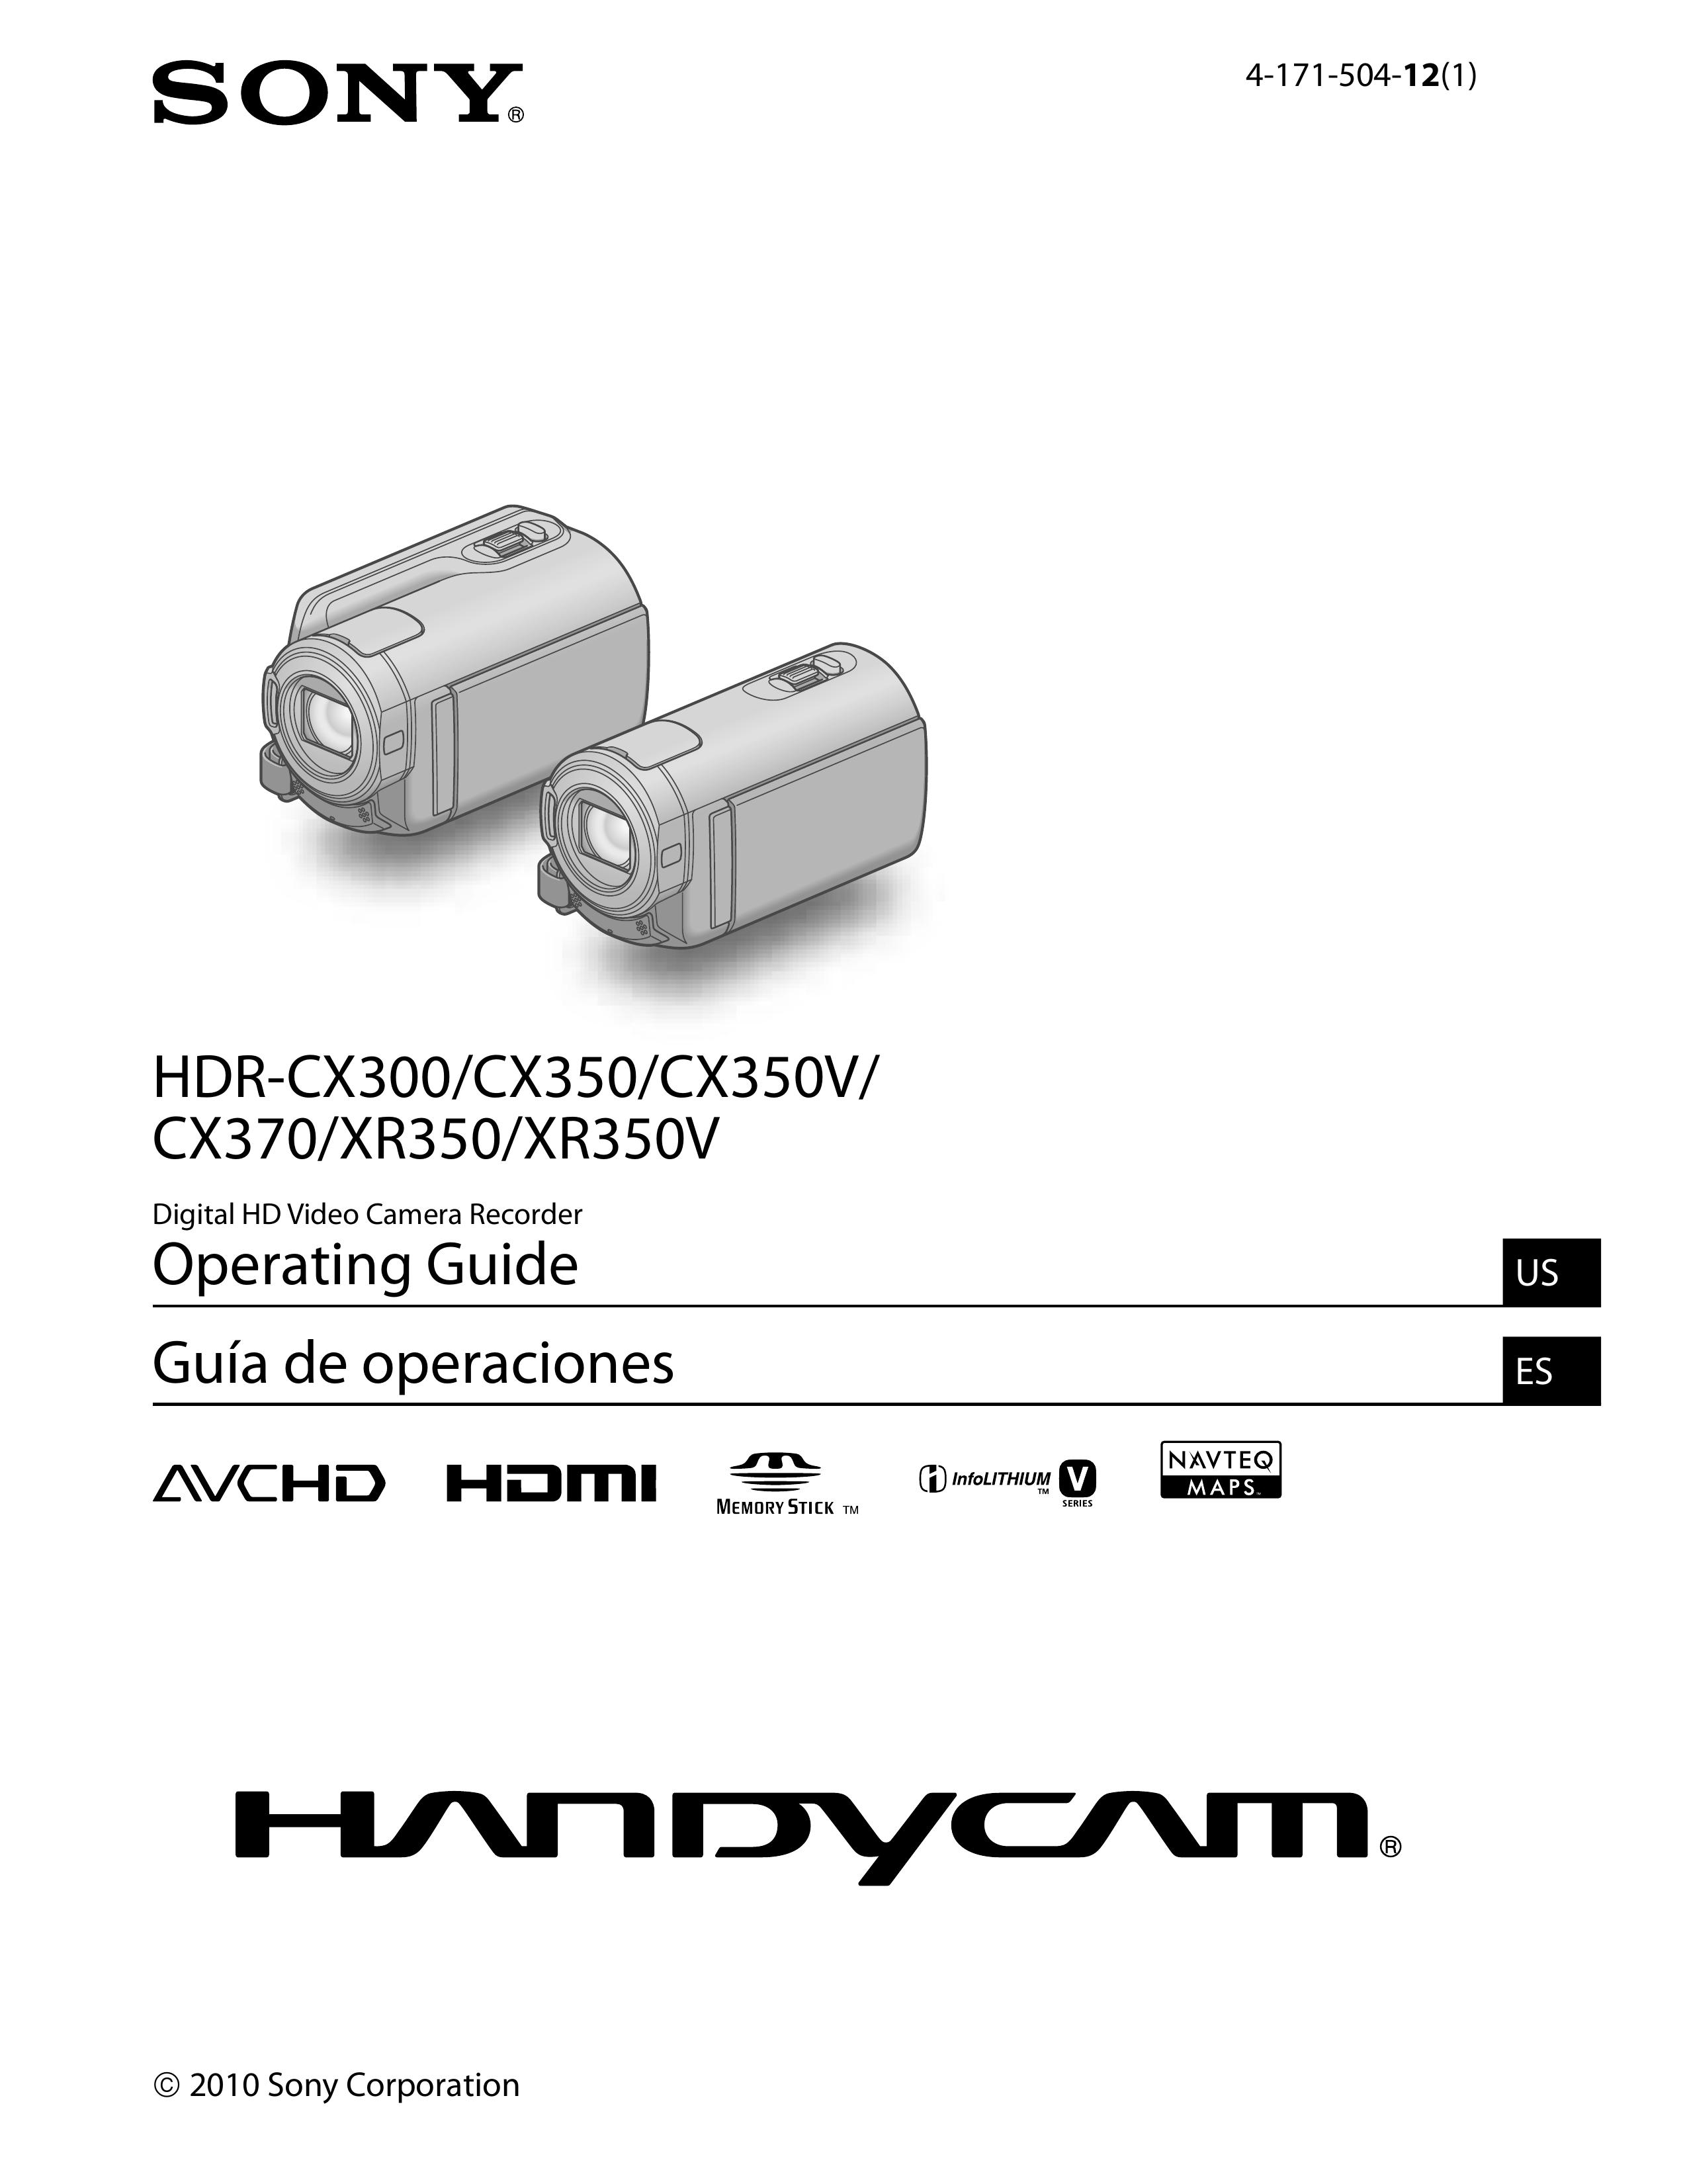 Sony HDR-CX350V Camcorder Accessories User Manual